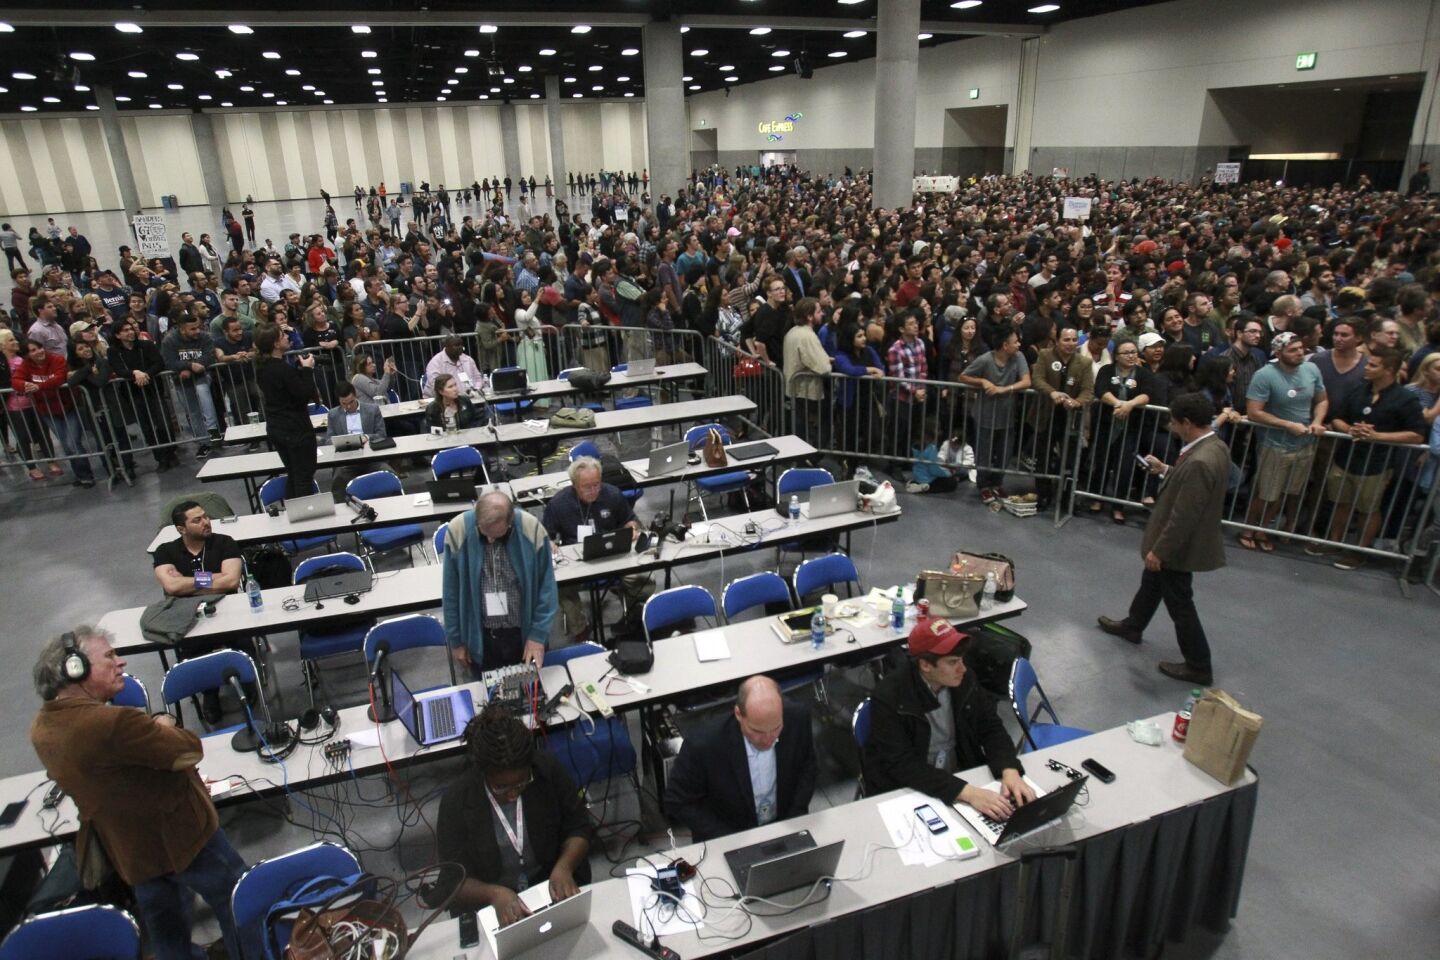 People surround the media work area as they watch Democratic presidential candidate Bernie Sanders.